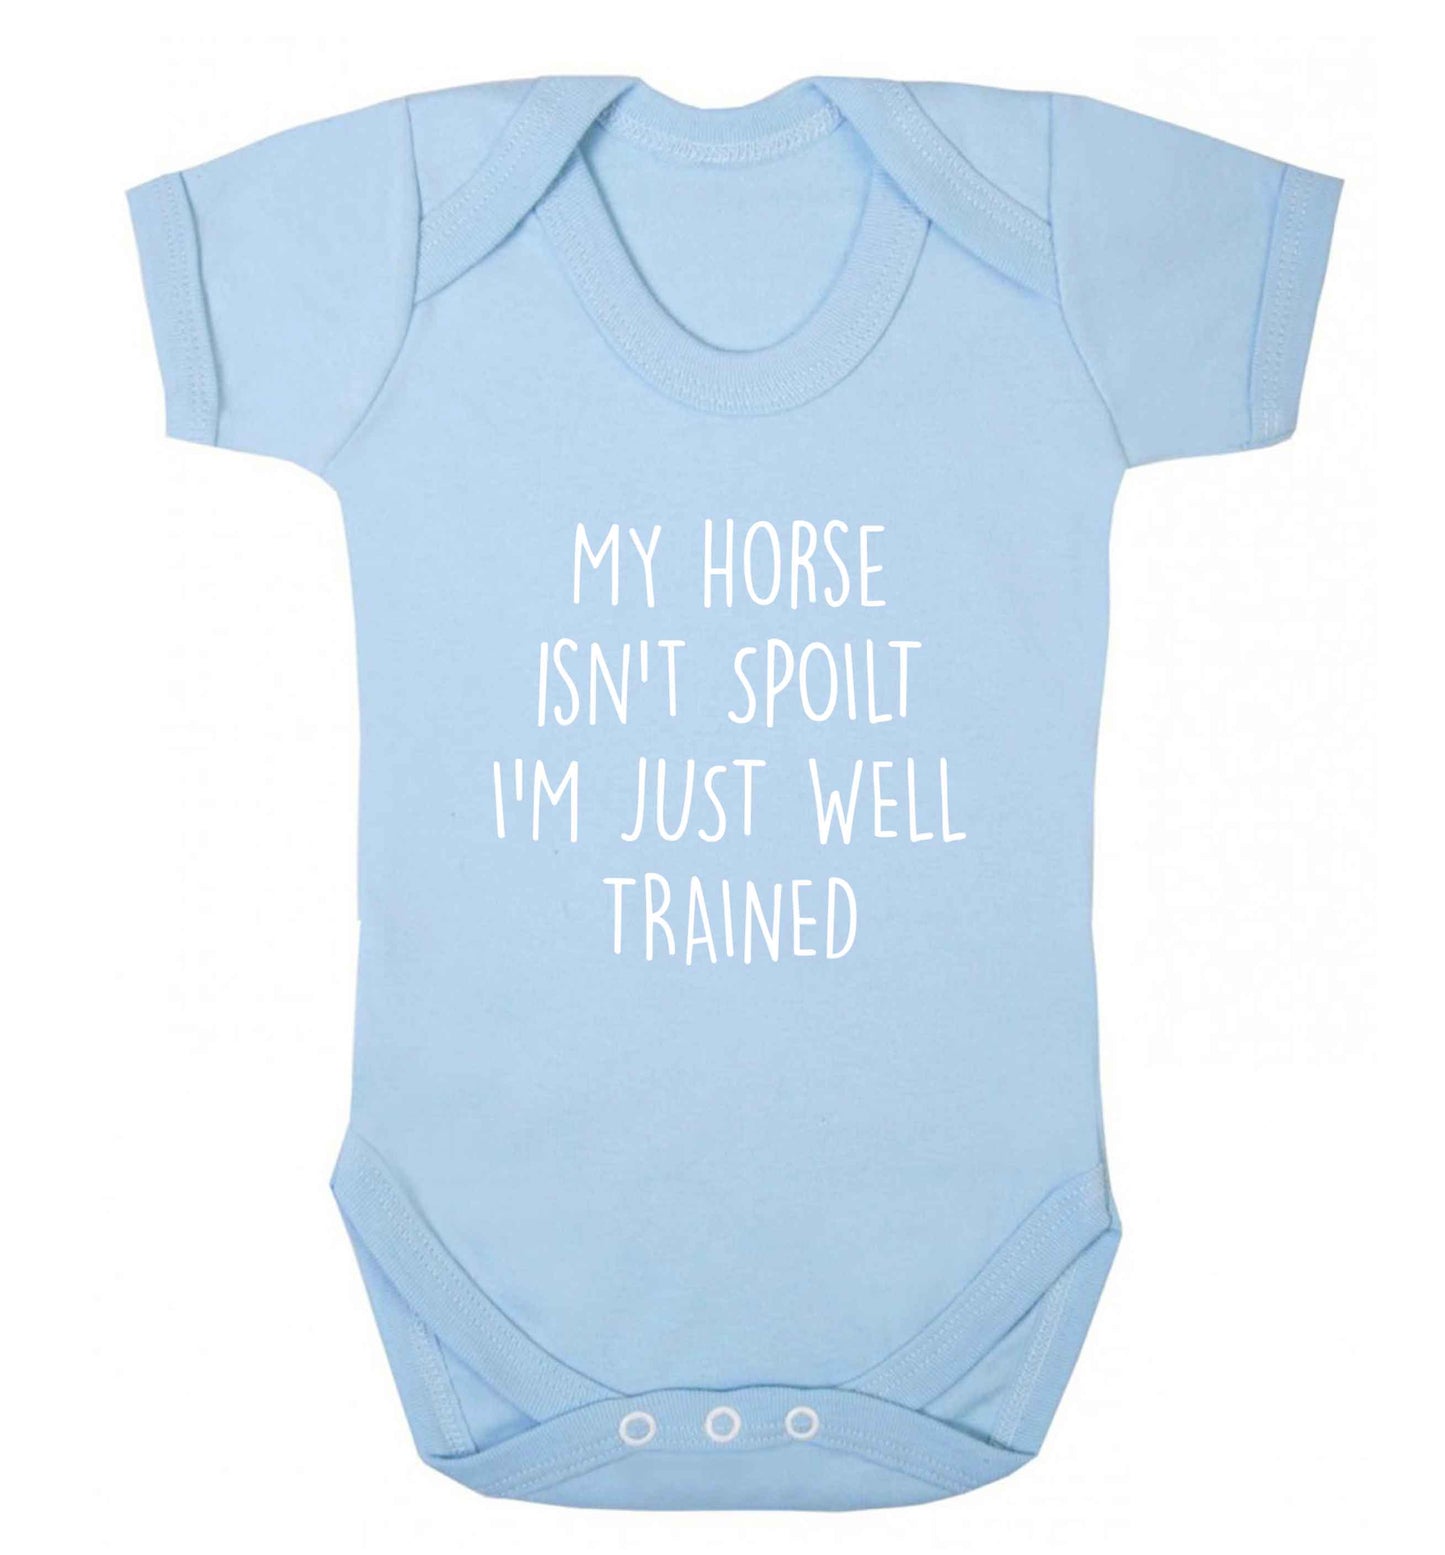 My horse isn't spoilt I'm just well trained baby vest pale blue 18-24 months